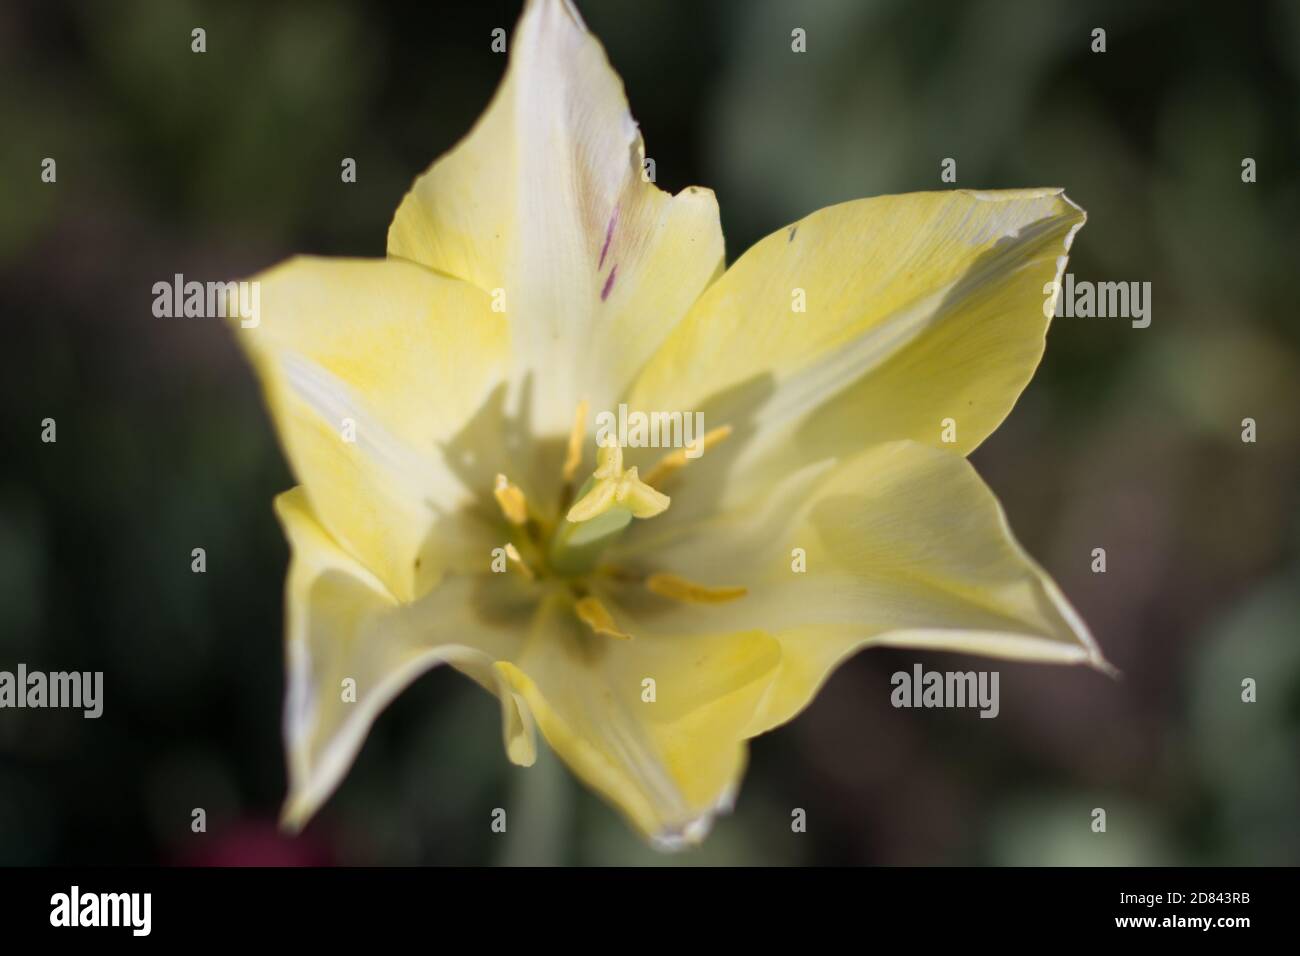 a big yellow flower growing in the garden Stock Photo